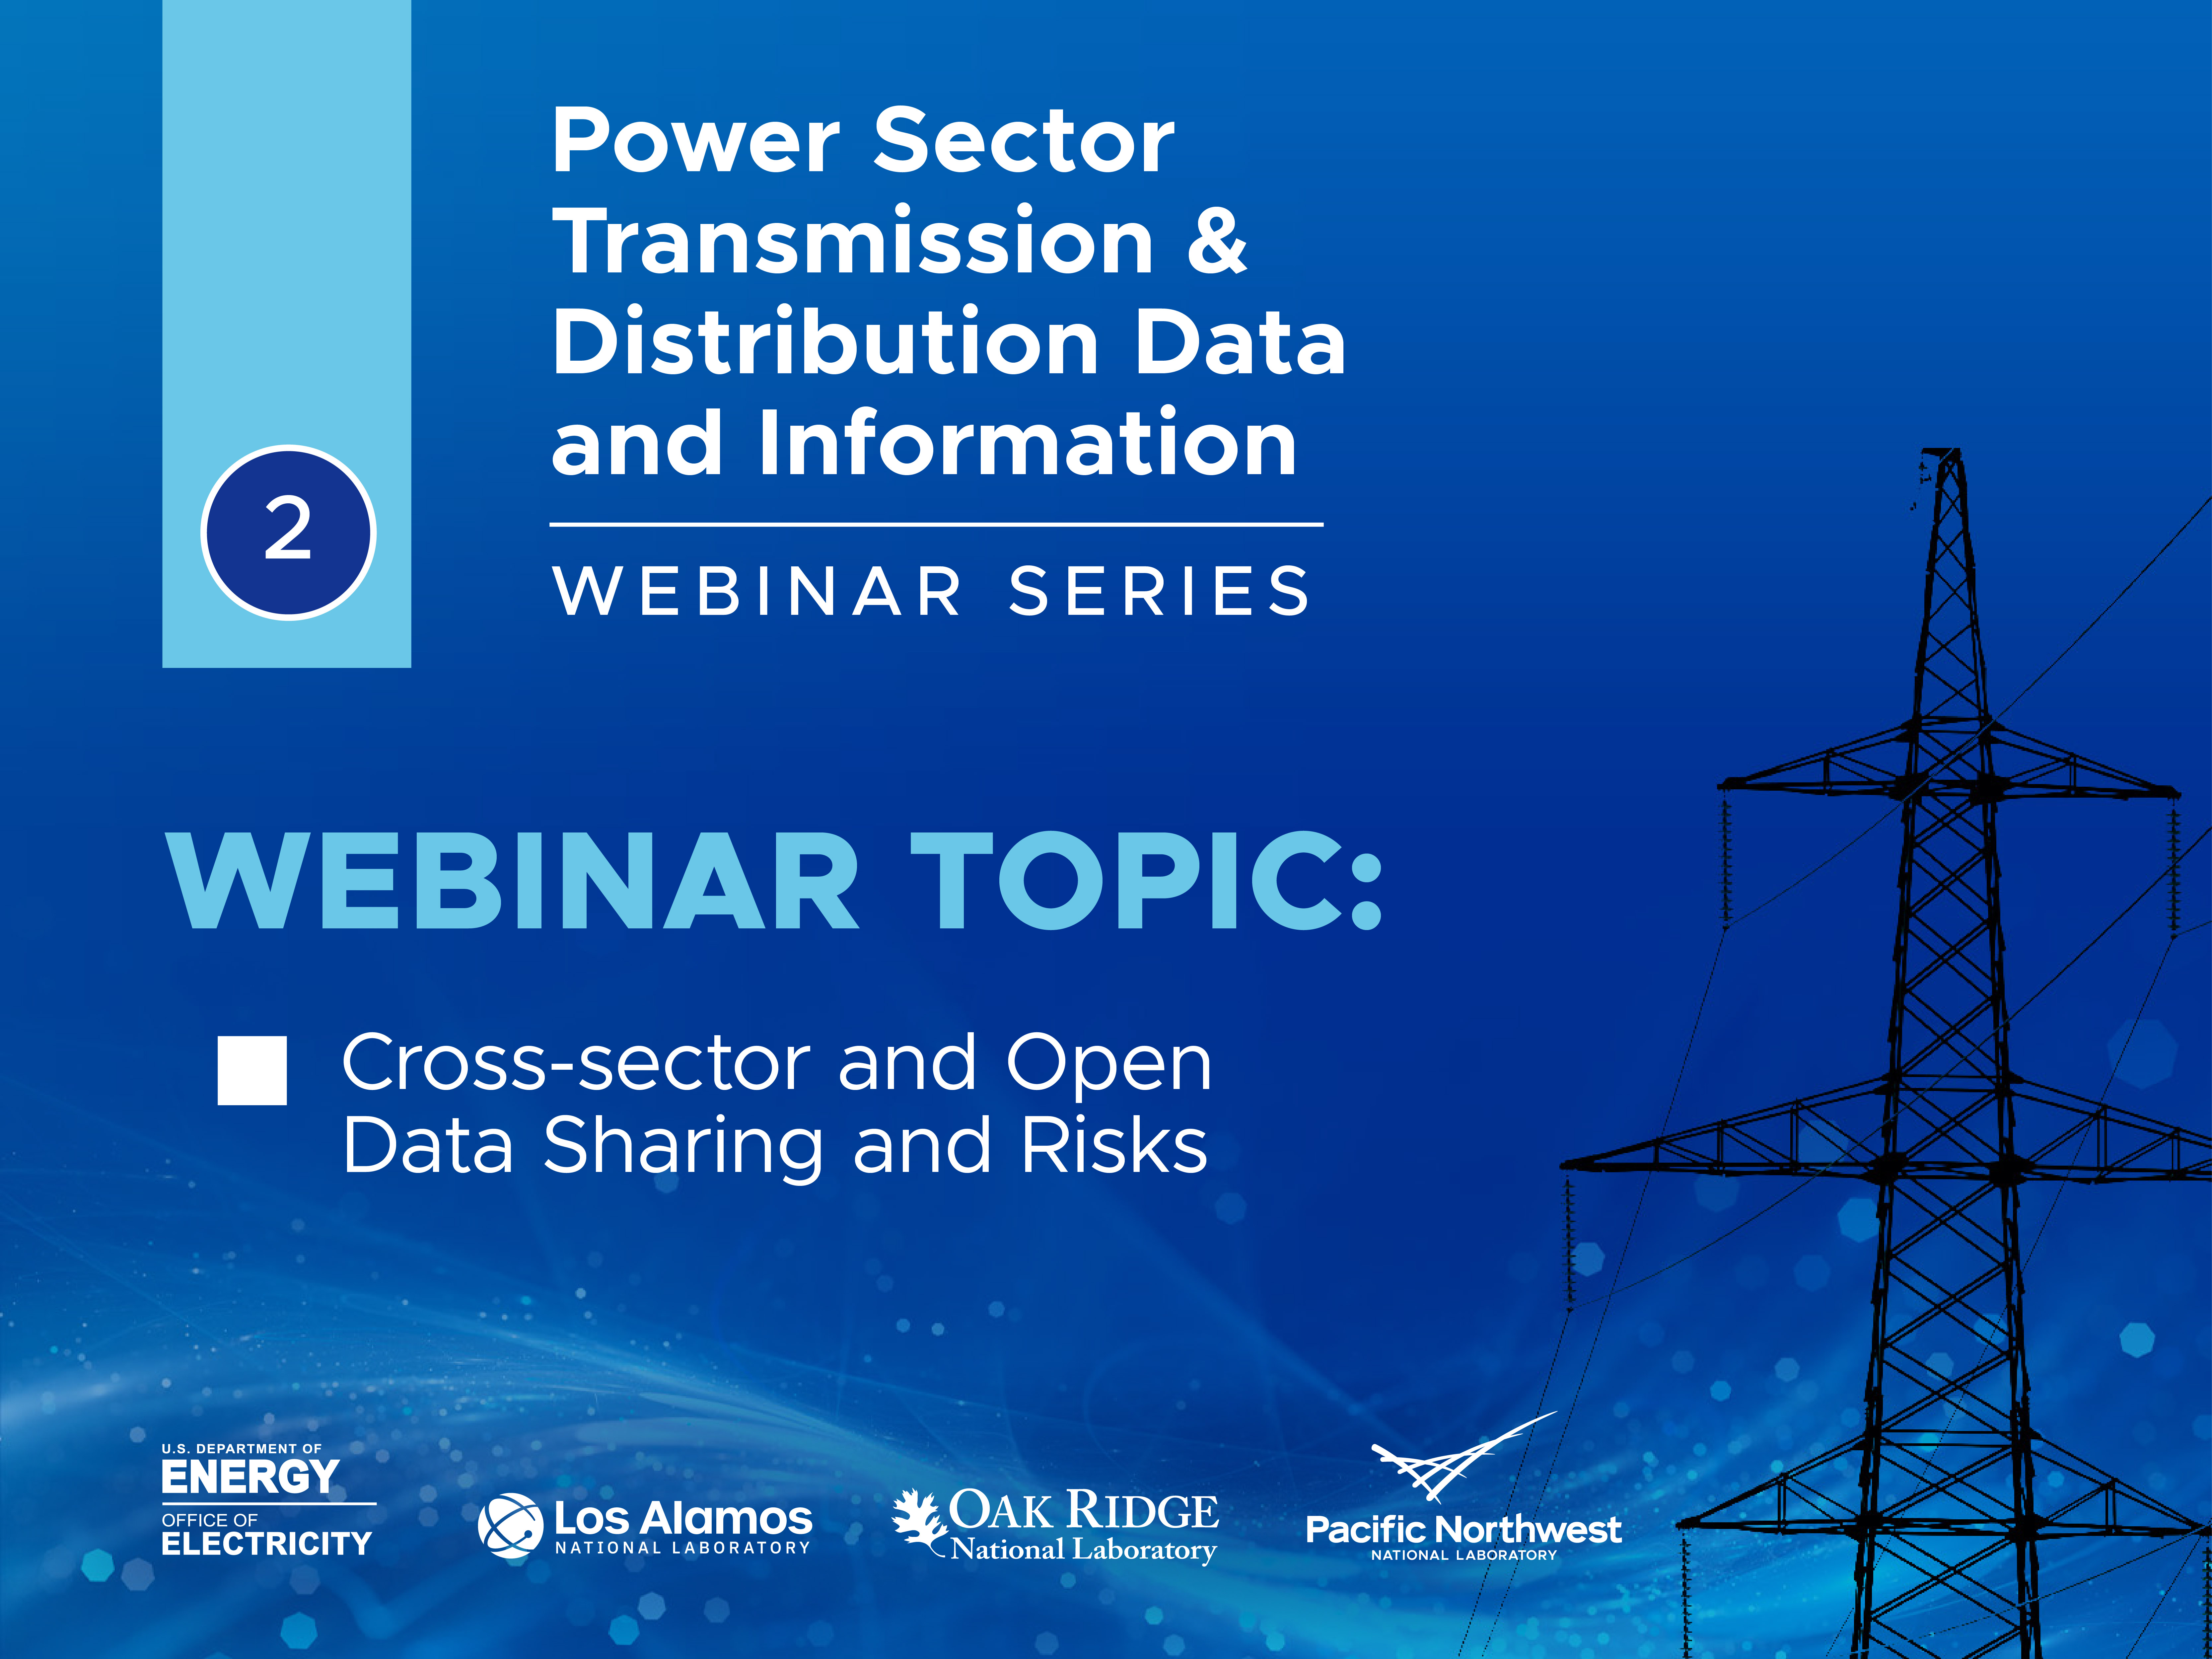 Power transmission line on electric blue background, light blue and white text highlighting webinar topic